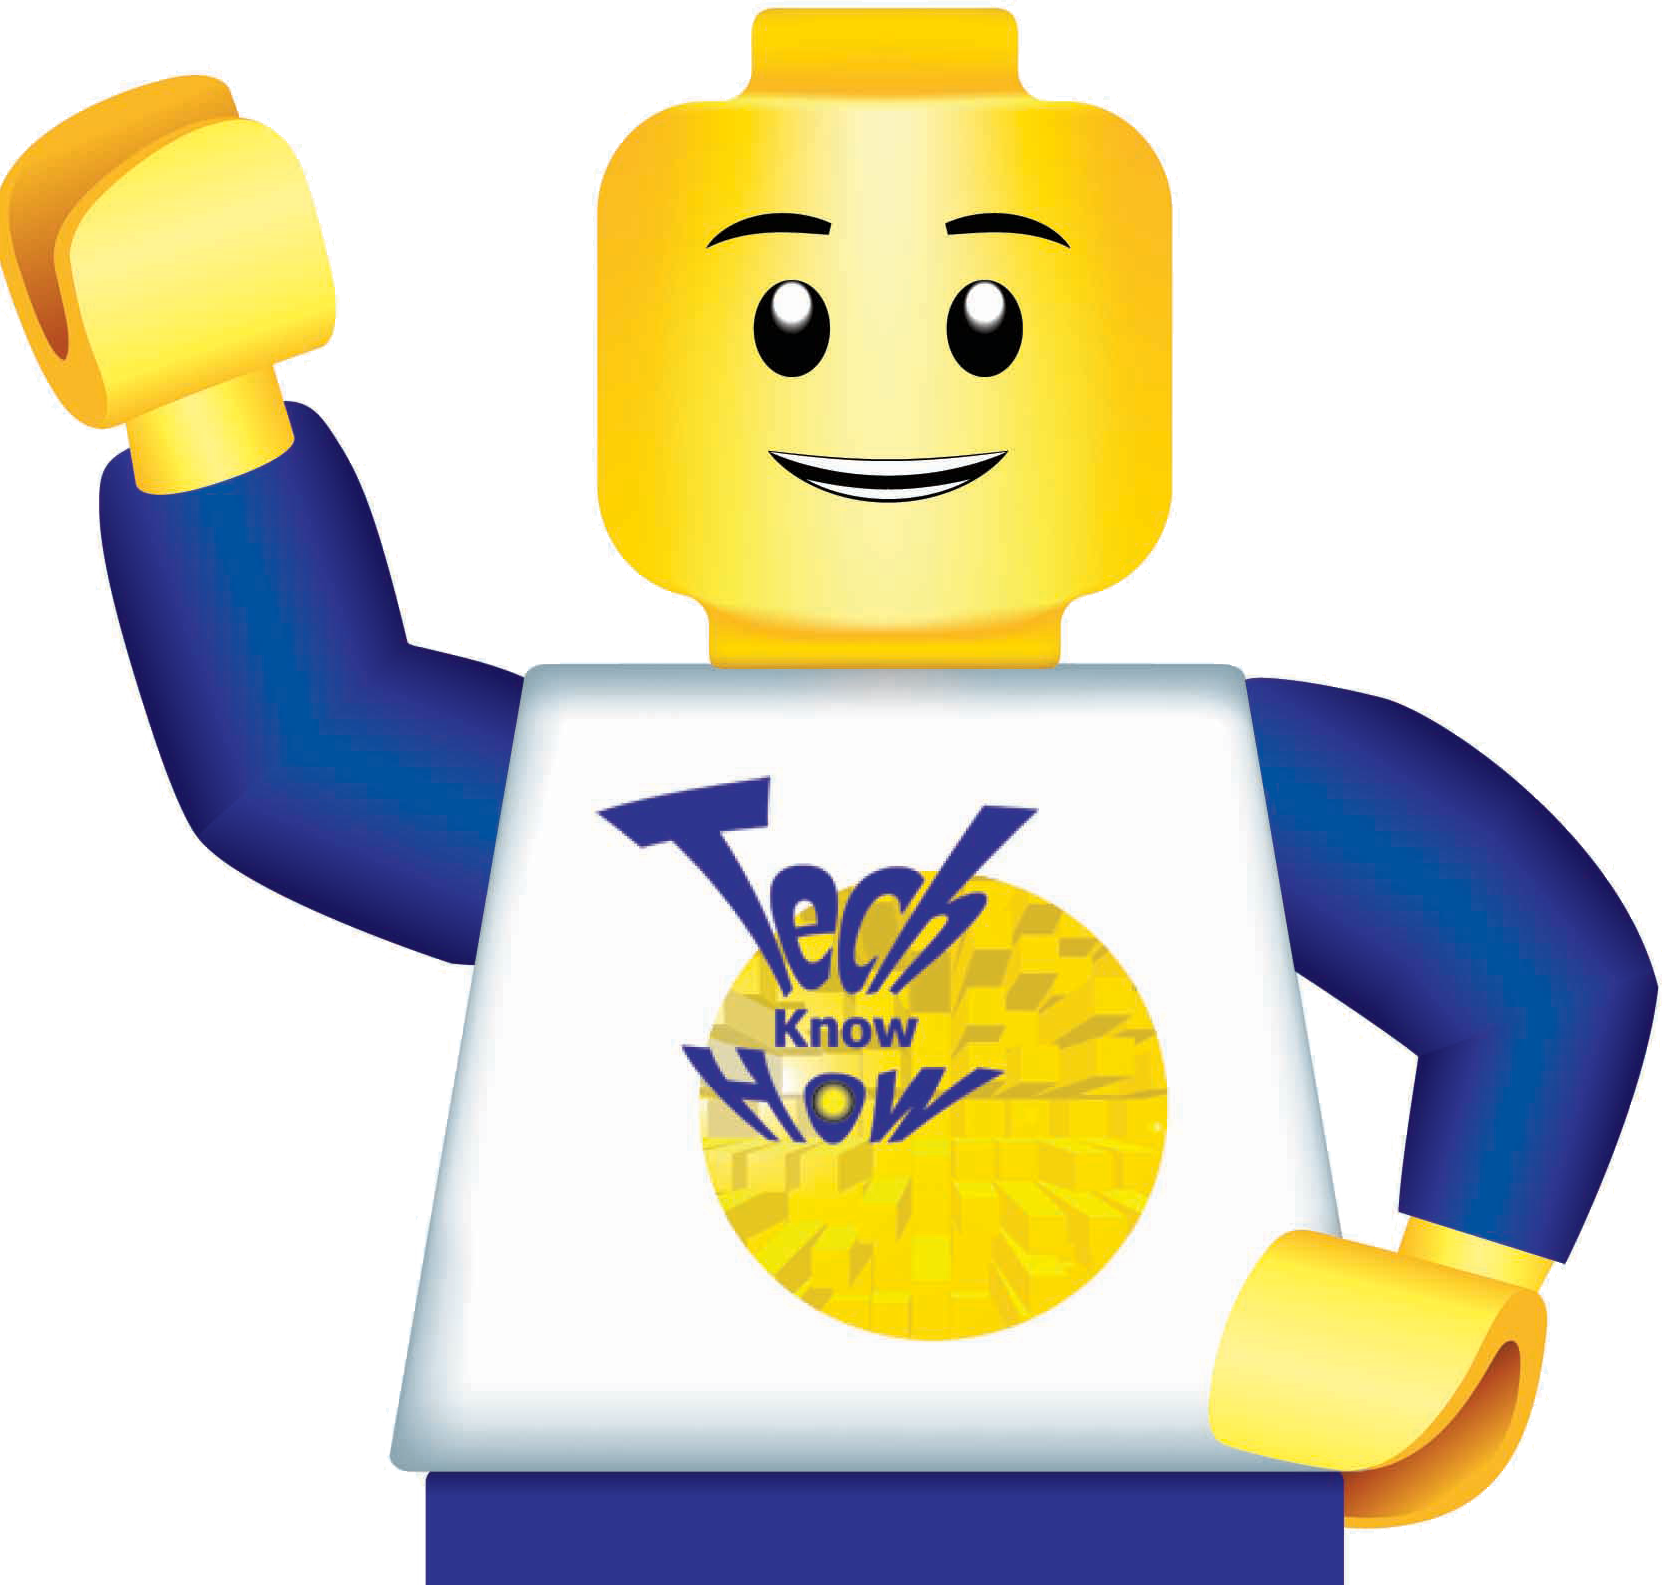 Images of lego man. Teach clipart camp game